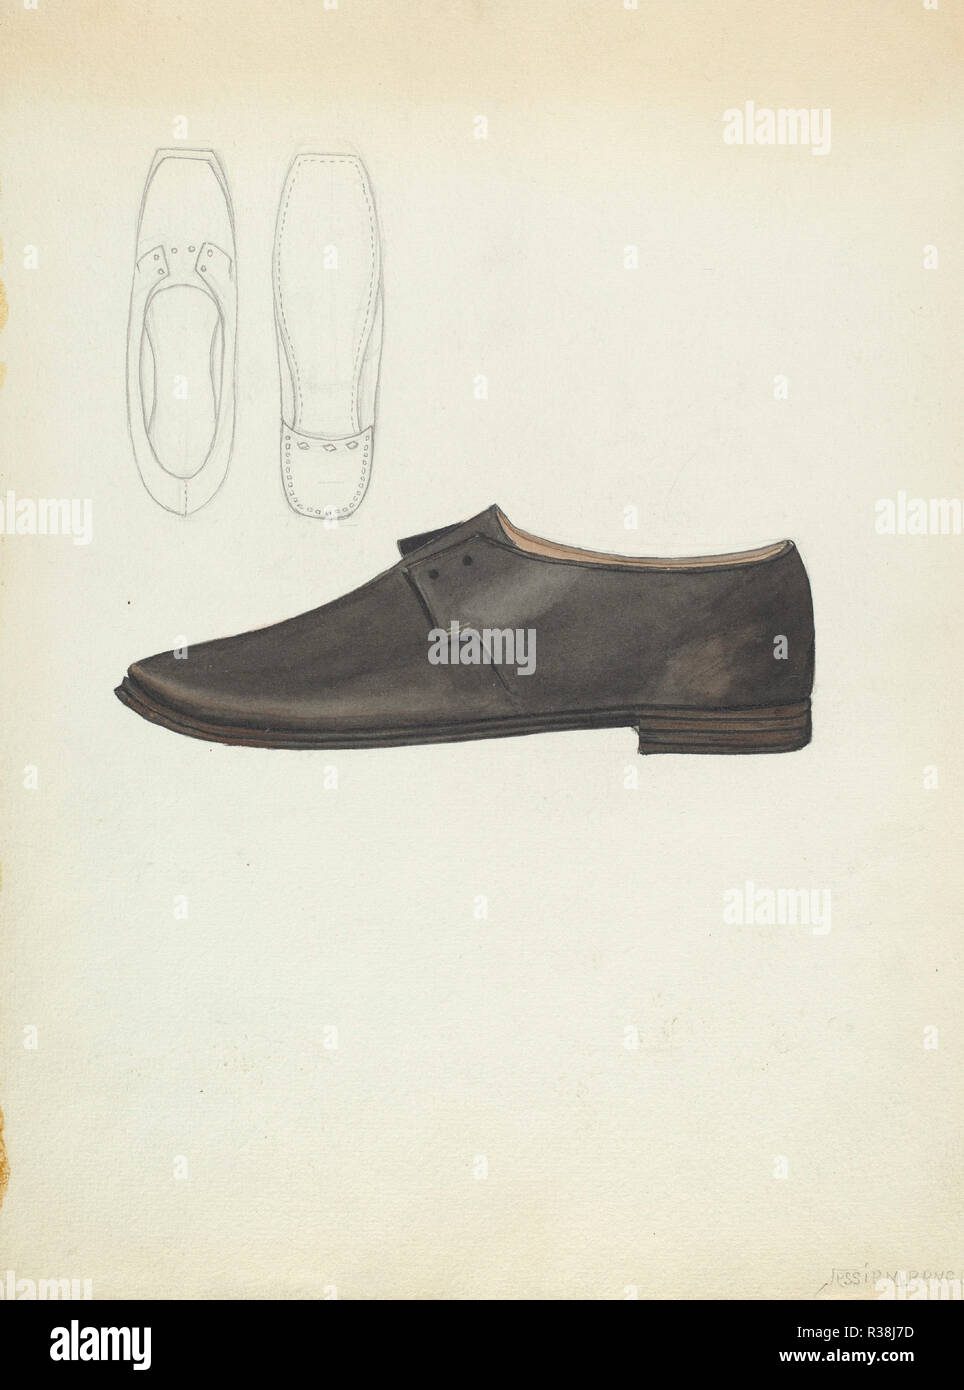 Man's Shoe. Dated: c. 1936. Dimensions: overall: 30 x 23 cm (11 13/16 x 9 1/16 in.). Medium: watercolor, graphite, and pen and ink on paper. Museum: National Gallery of Art, Washington DC. Author: Jessie M. Benge. Stock Photo